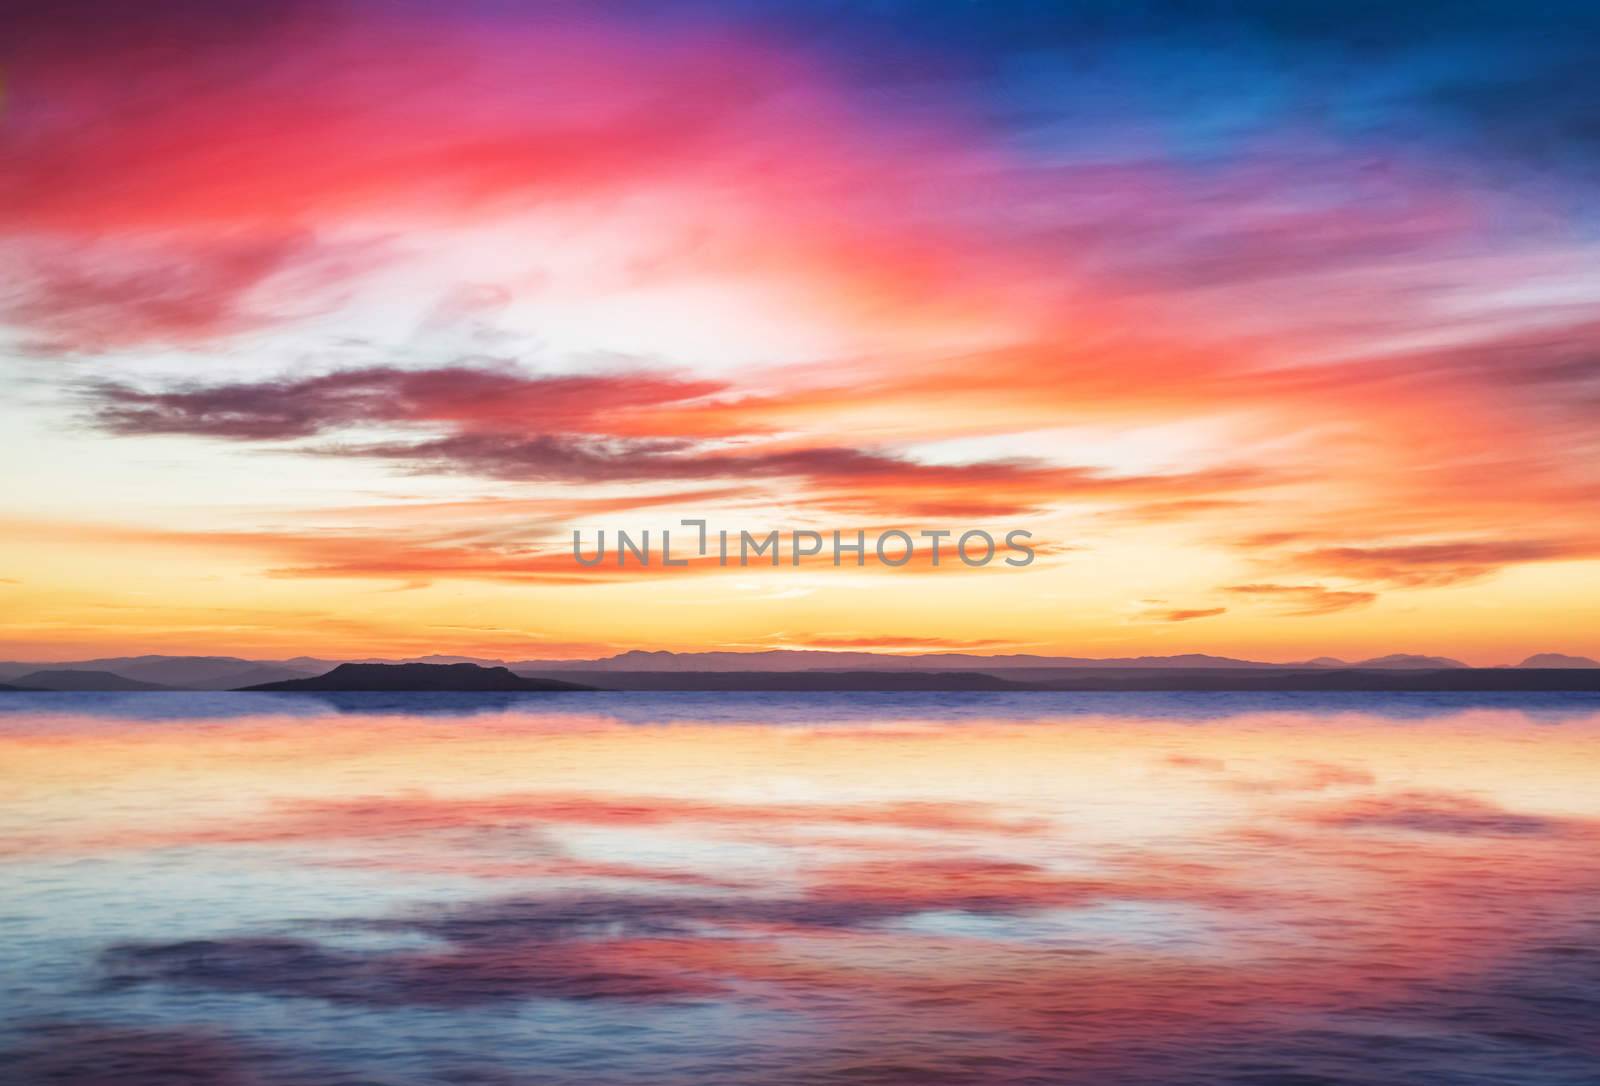 sunset scene on quiet sea with mountains in background, colorful sky with soft clouds